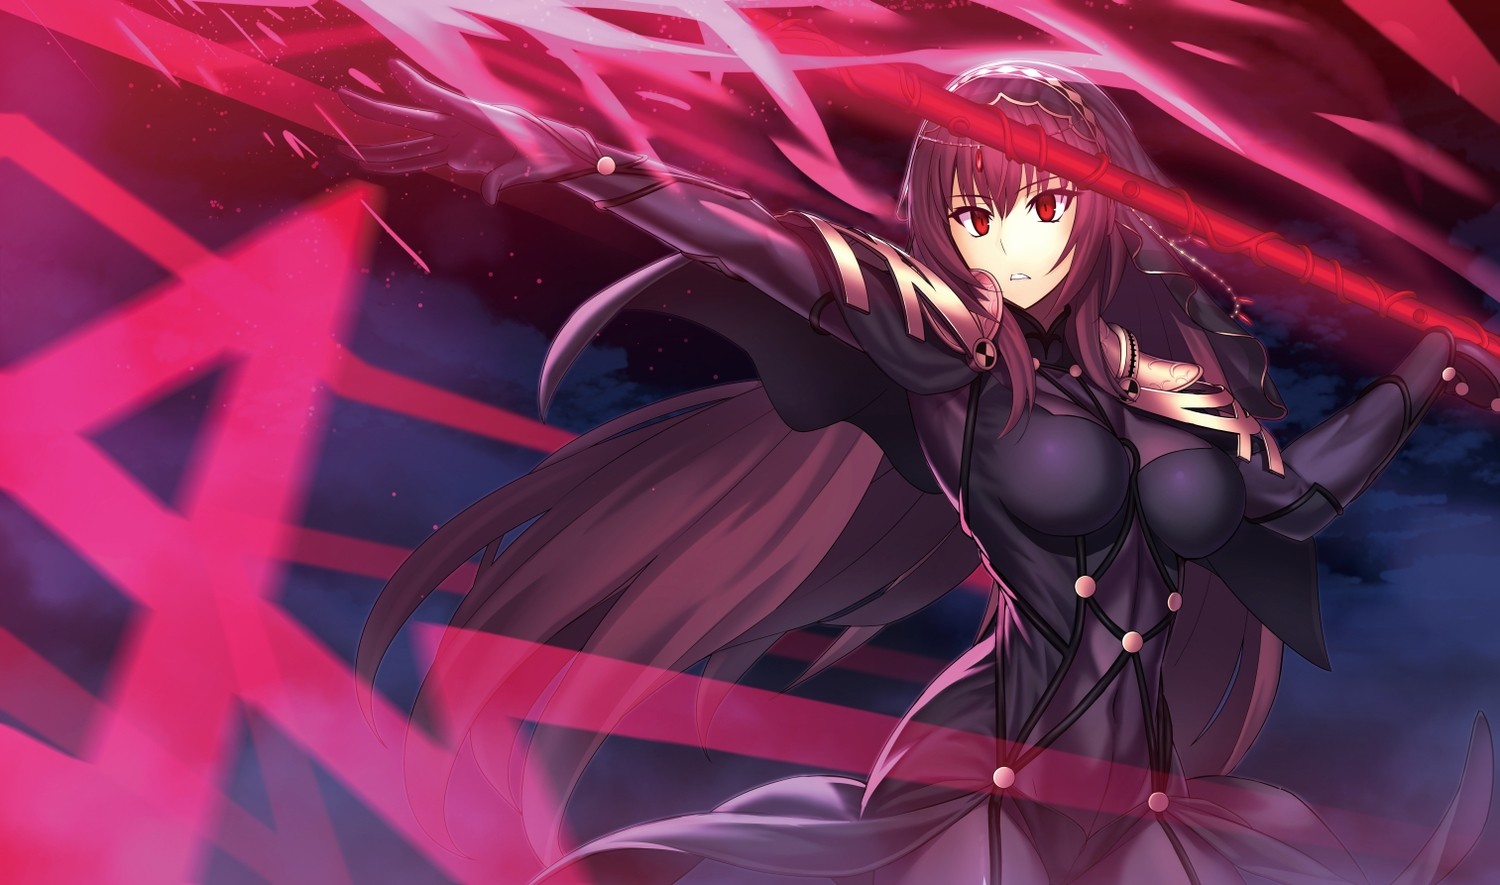 Anime 1500x885 anime anime girls long hair Fate/Grand Order Fate series Scathach bodysuit red eyes purple hair women standing Pixiv